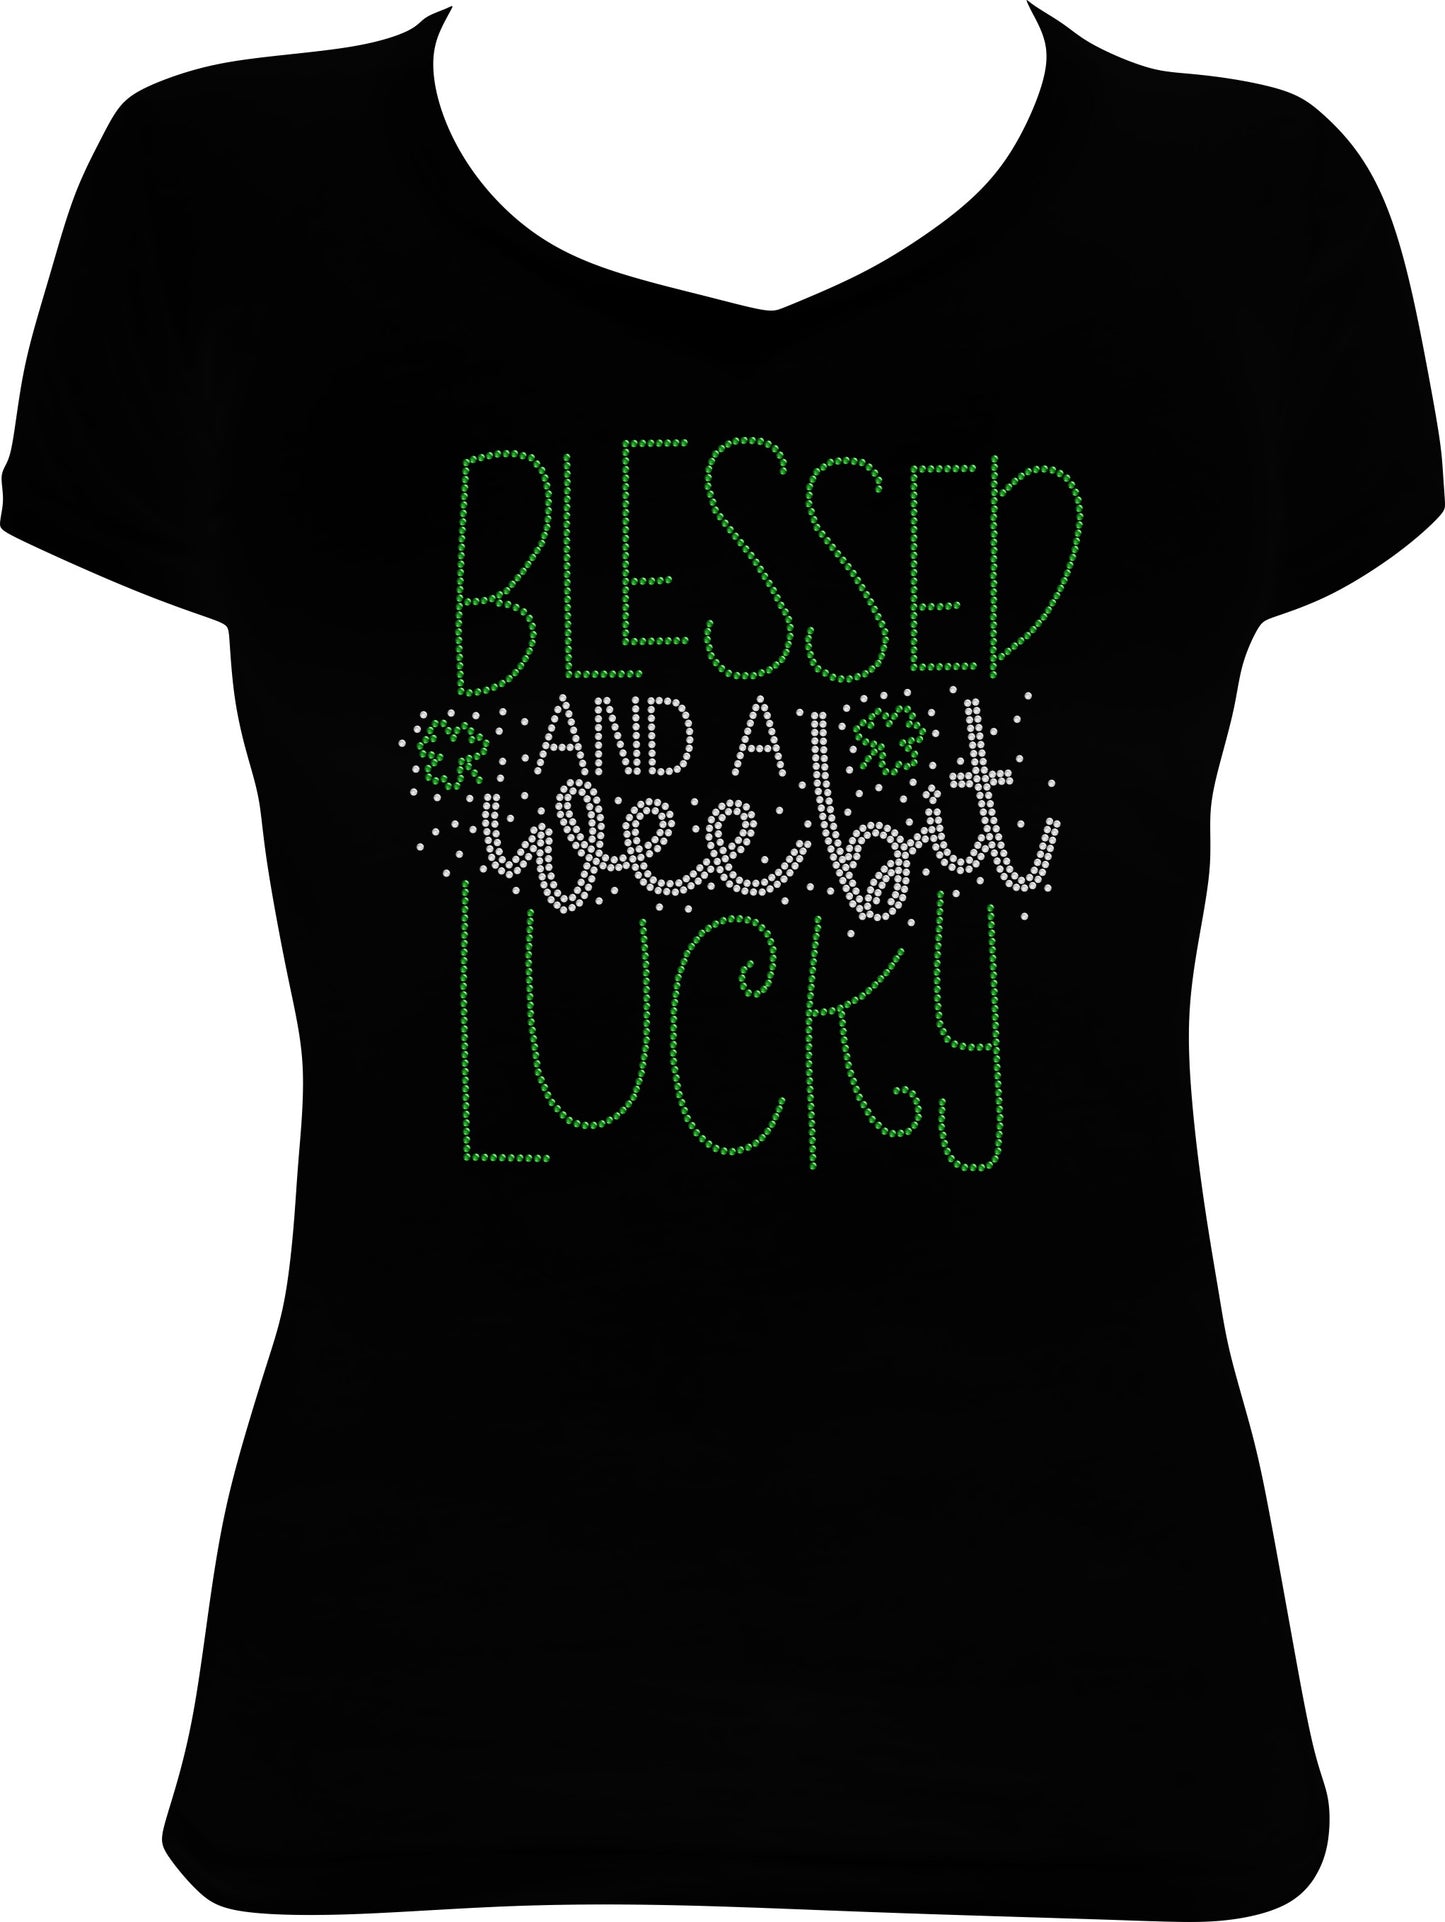 Blessed and a wee bit Lucky Rhinestone Shirt